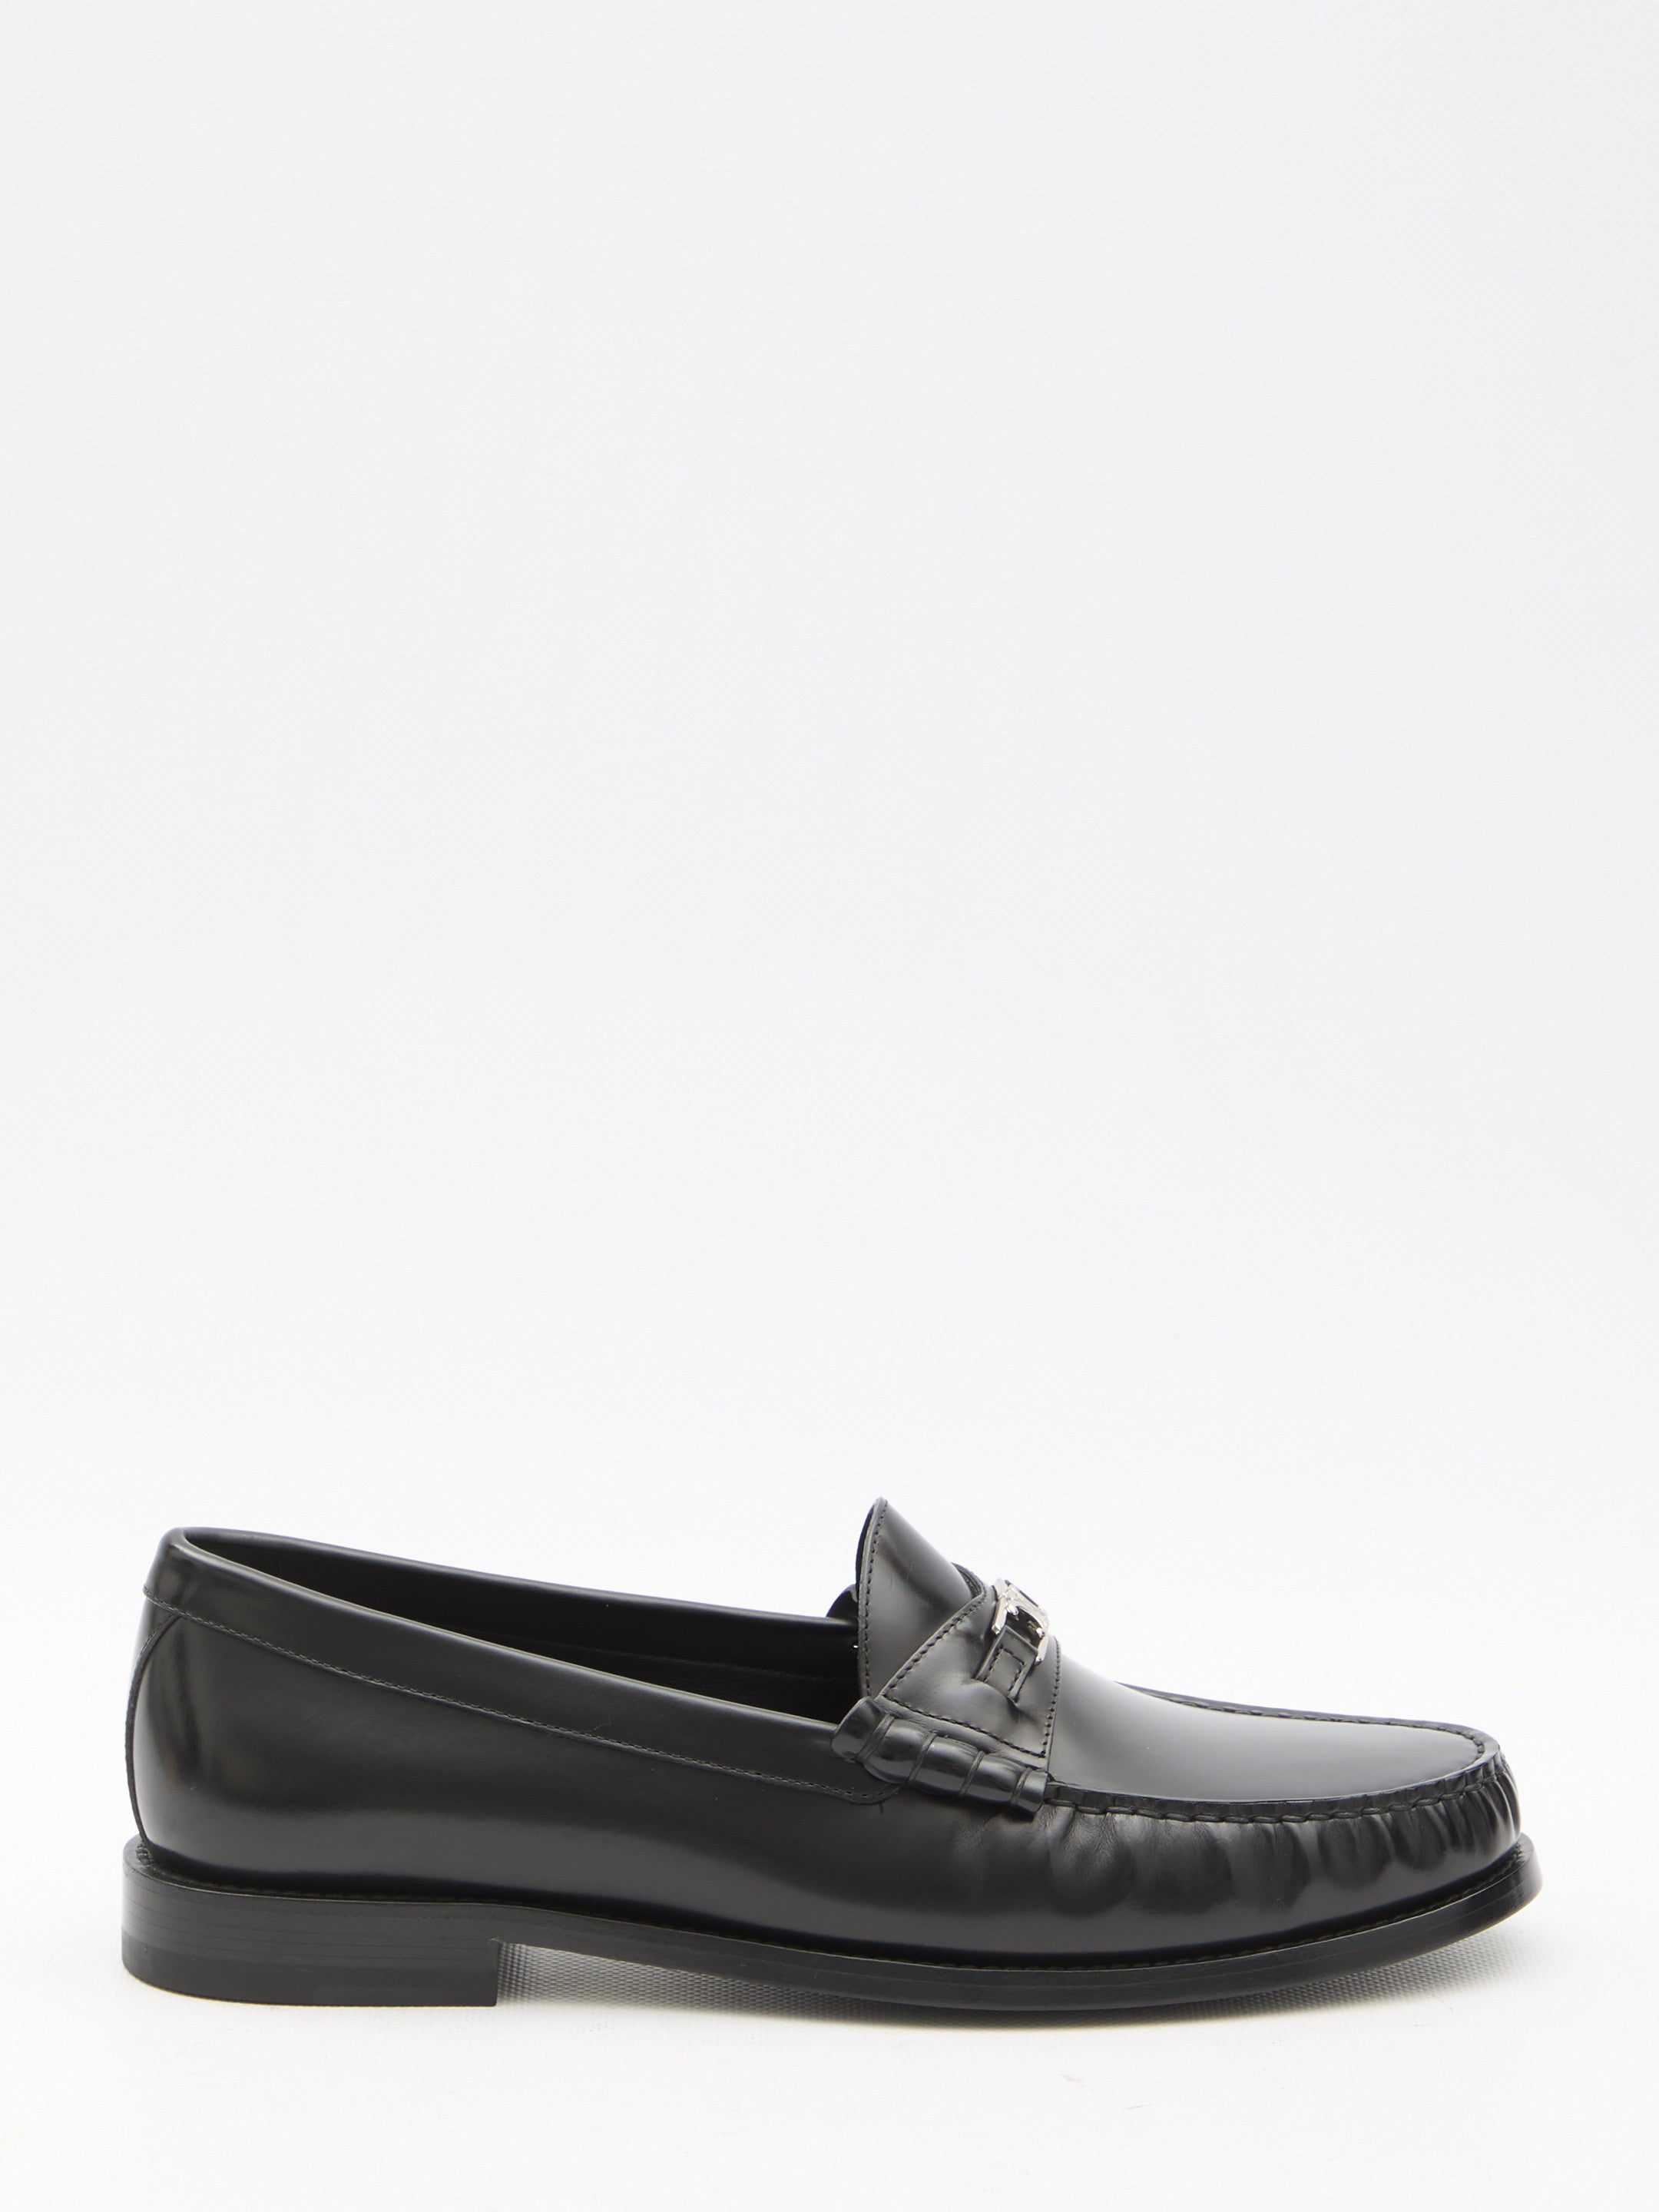 CELINE-OUTLET-SALE-Triomphe-Celine-Luco-loafers-Flache-Schuhe-40-BLACK-ARCHIVE-COLLECTION.jpg